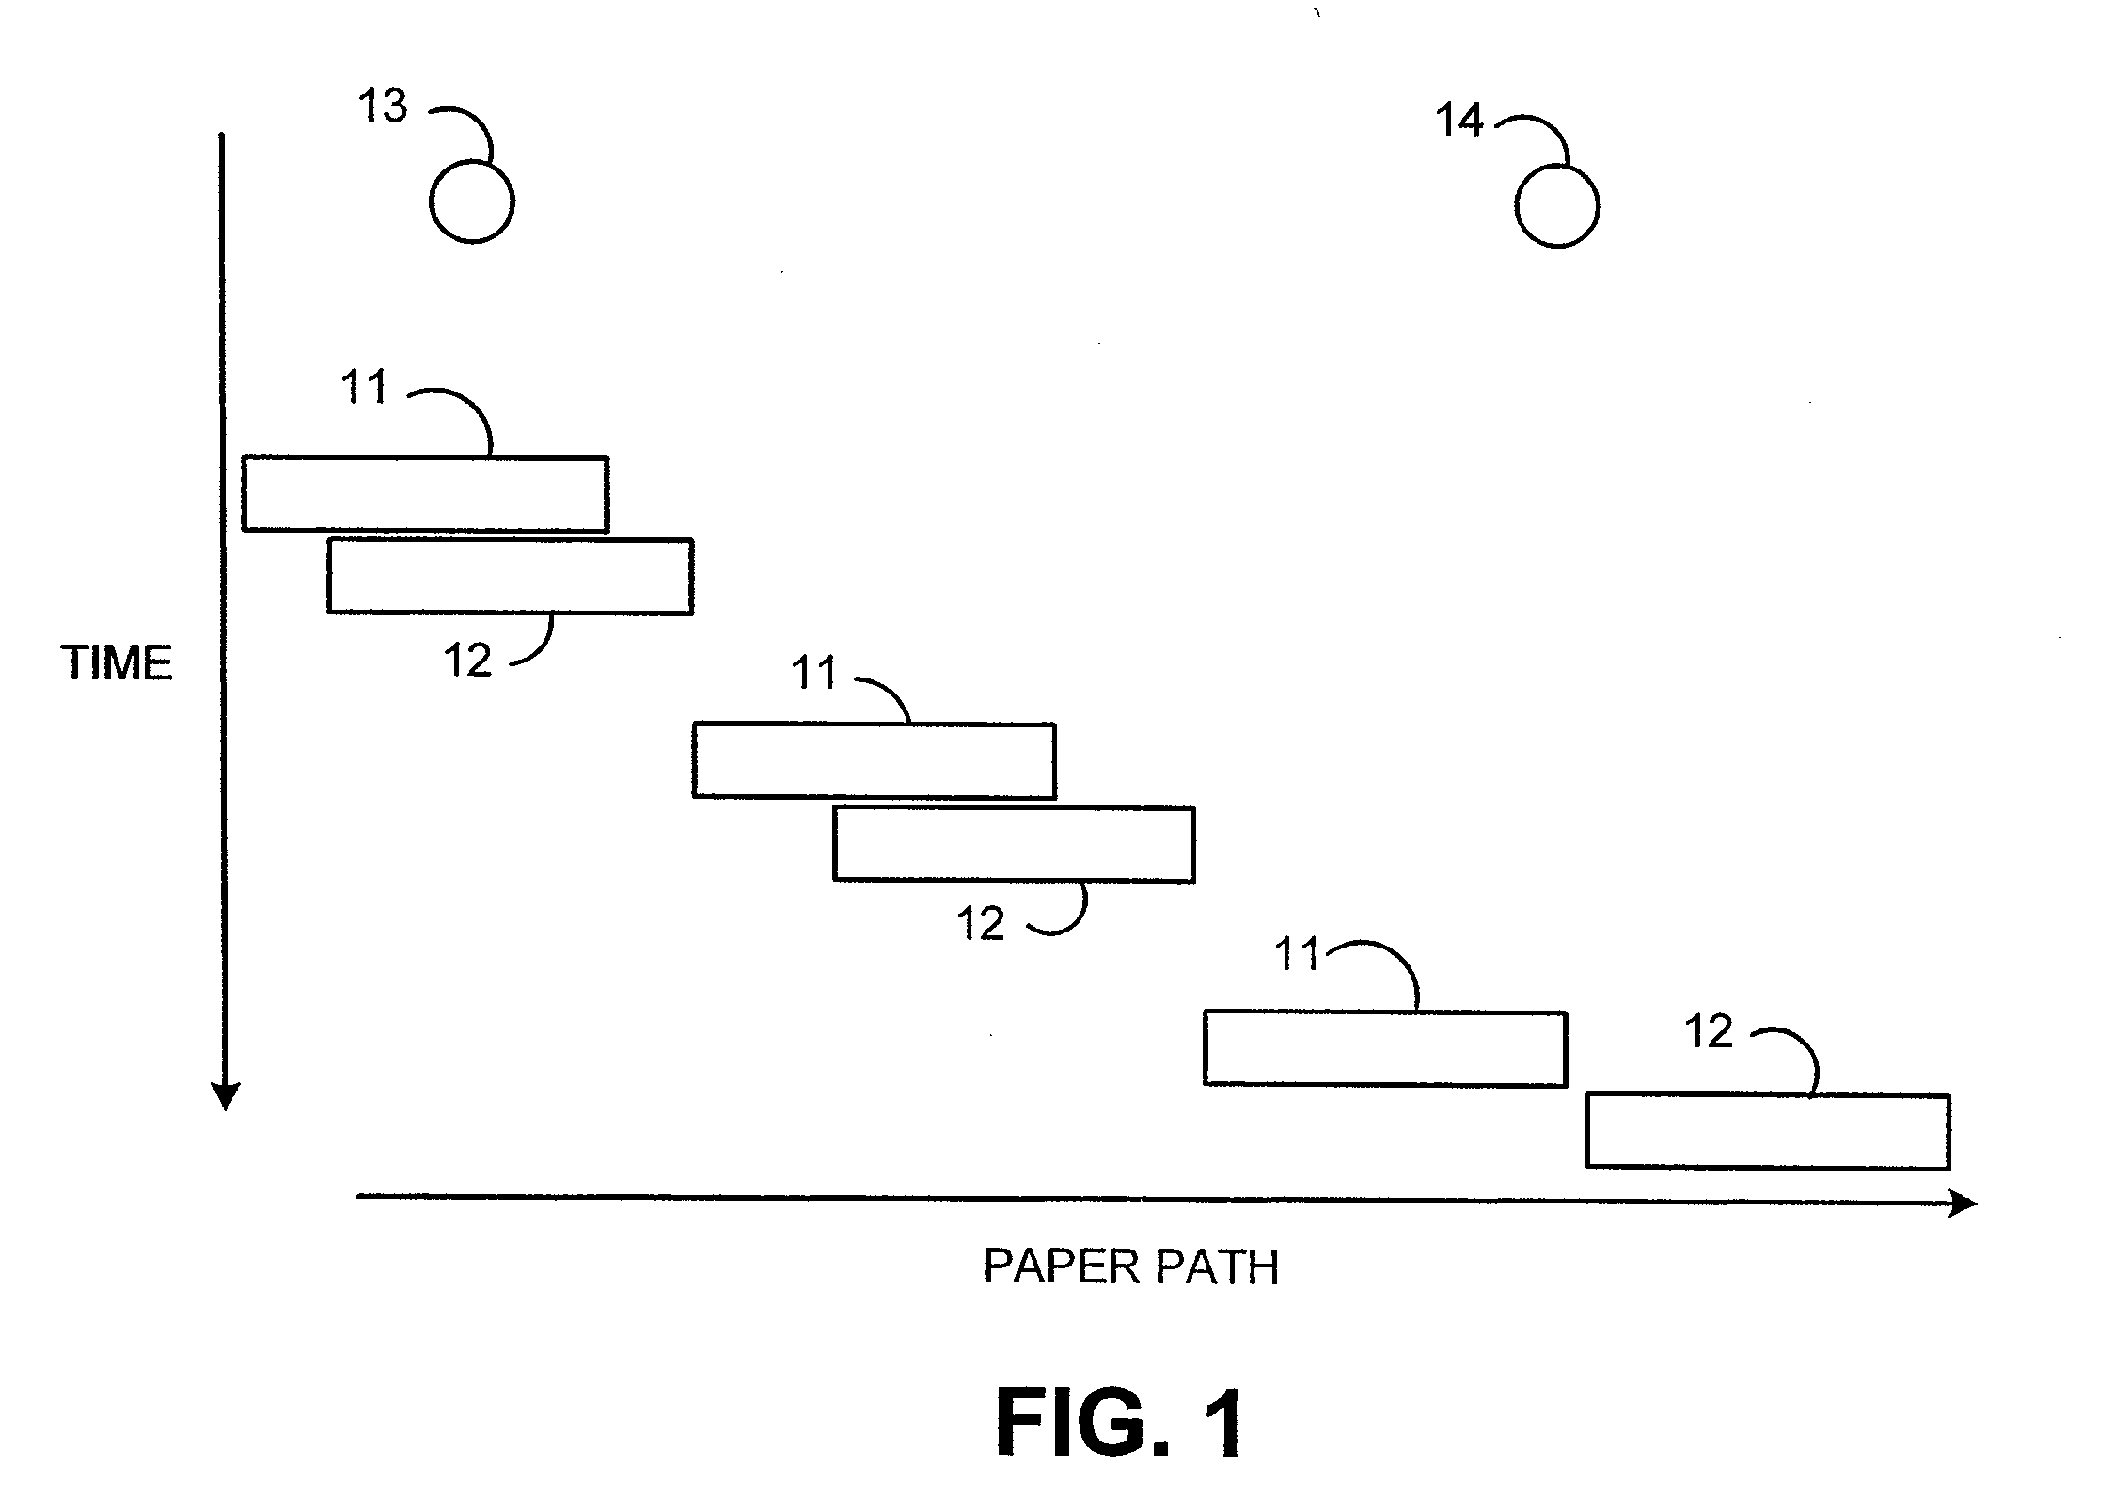 Method for detecting paper feed shingling errors and synchronizing a printer and a feeder